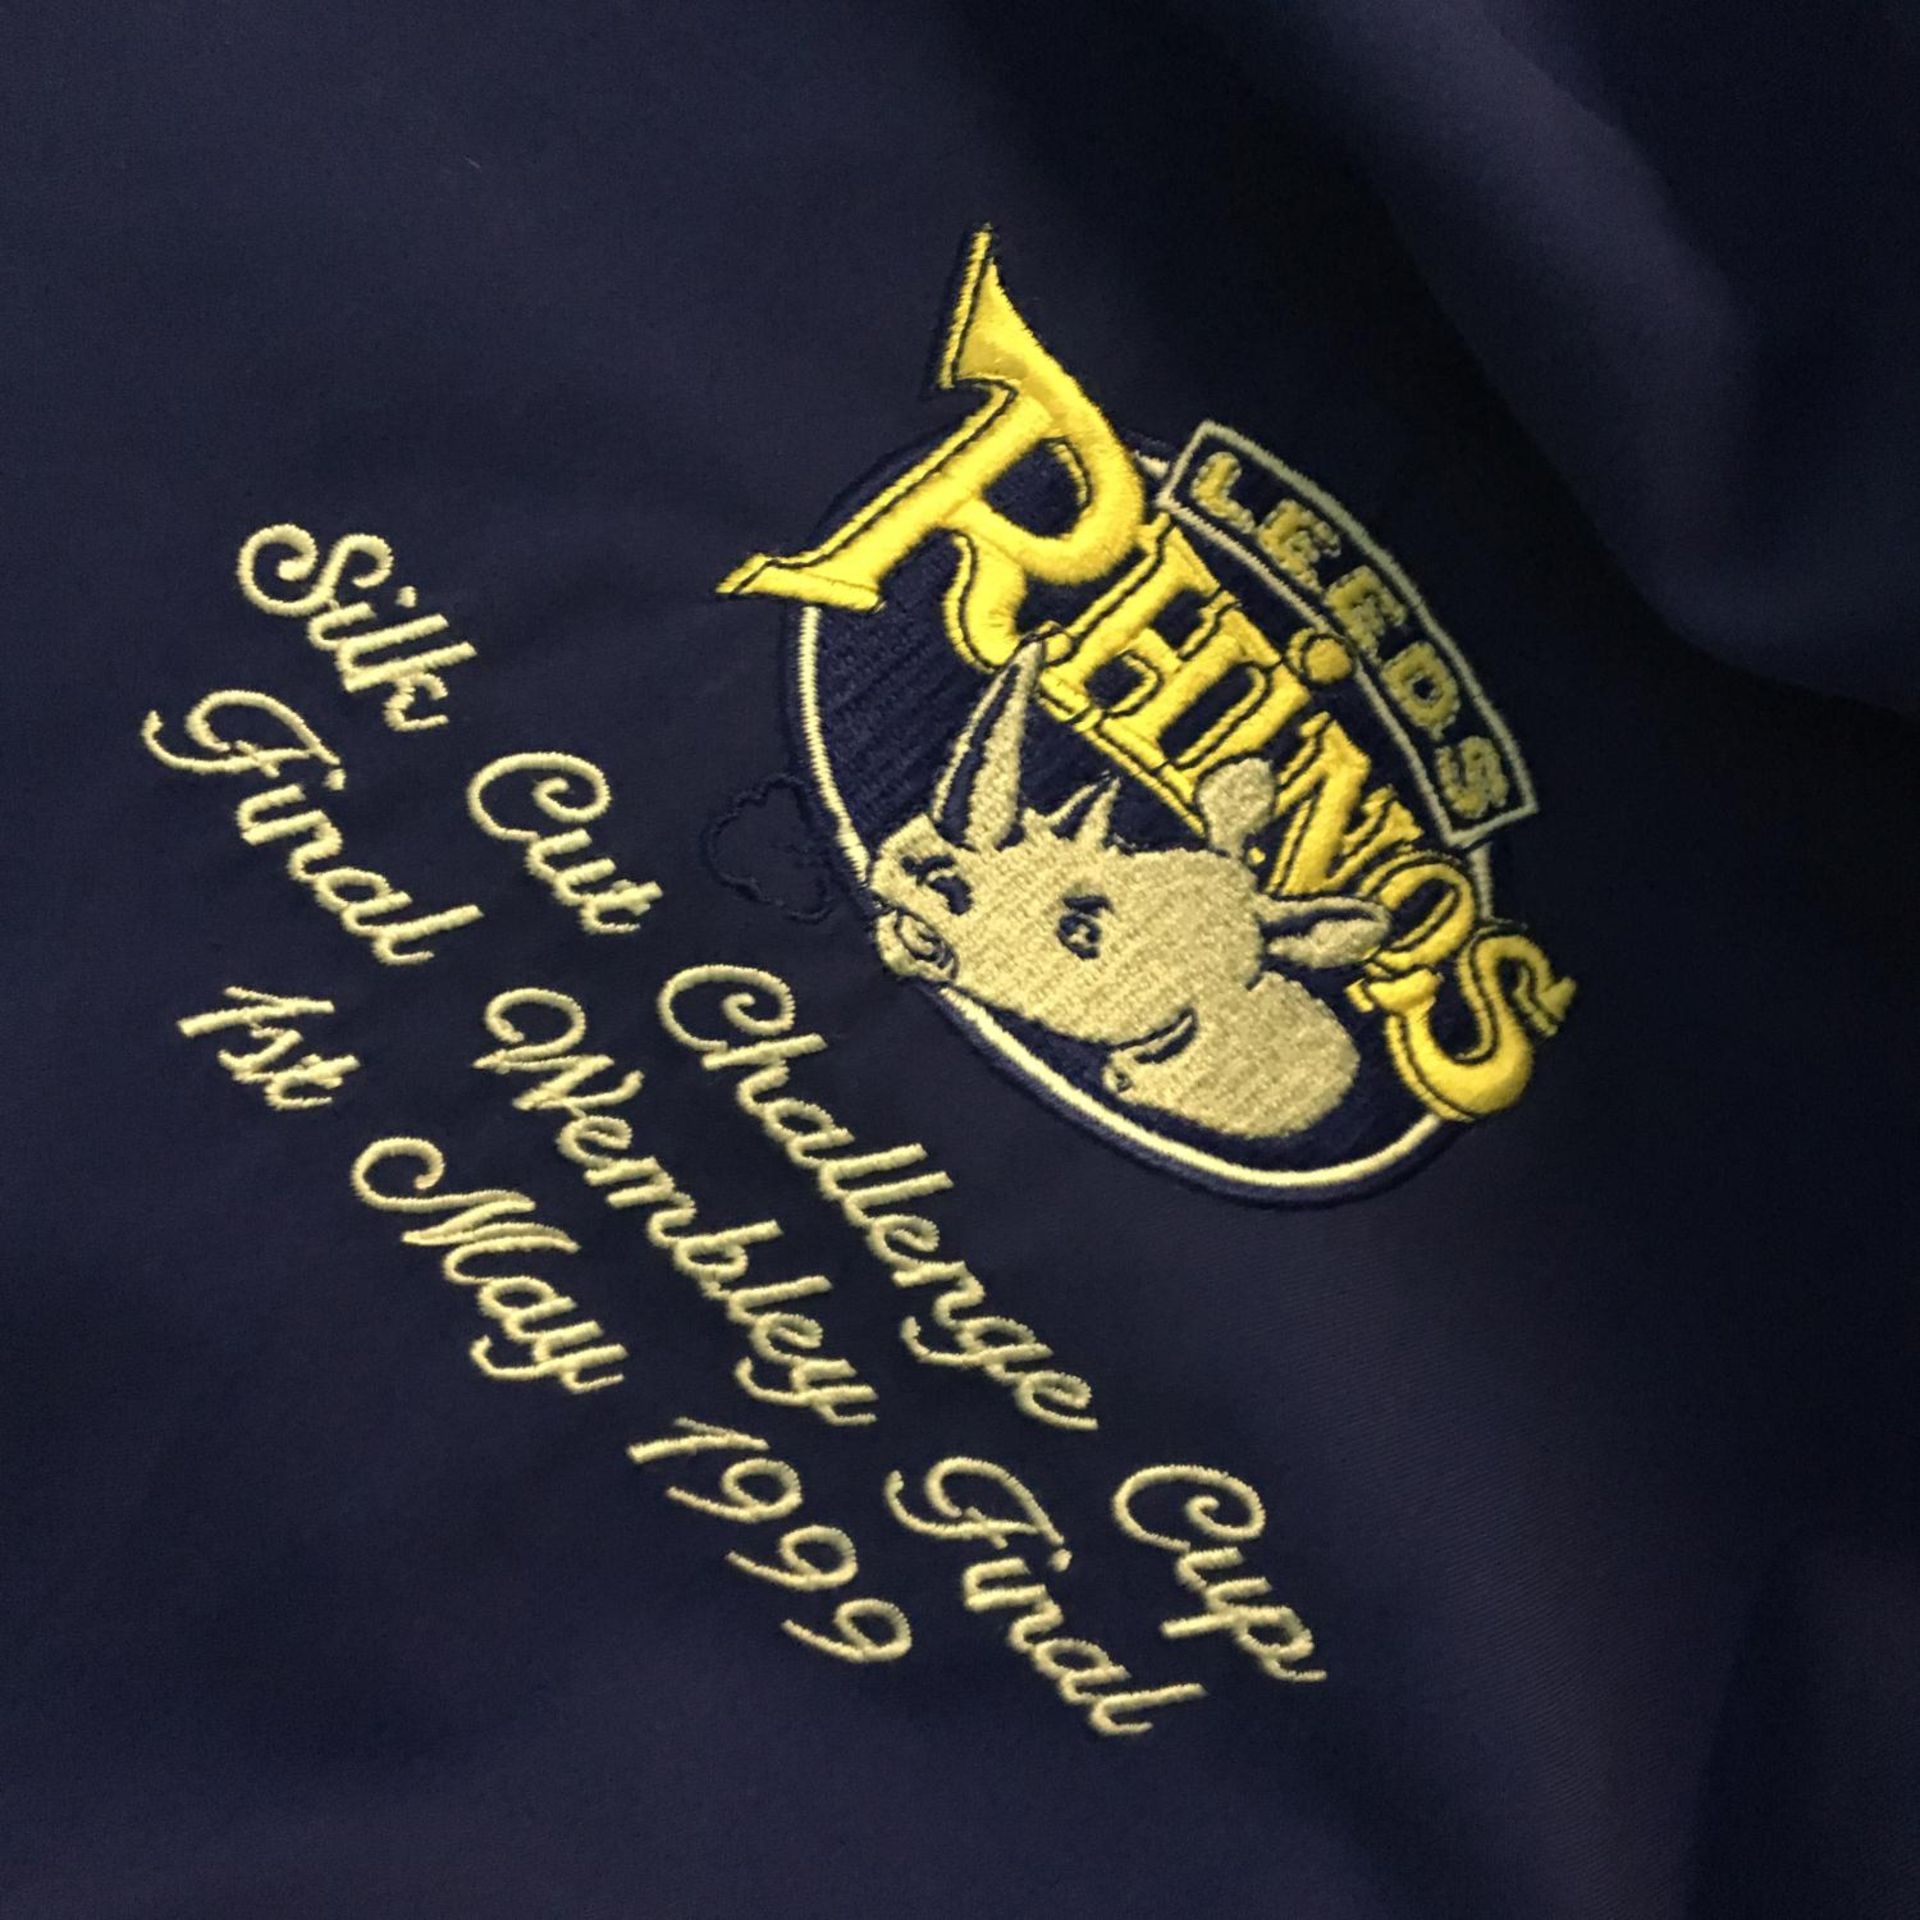 Leeds Rhinos Challenge Cup Final 1999 Jacket with Autograph - Image 2 of 2